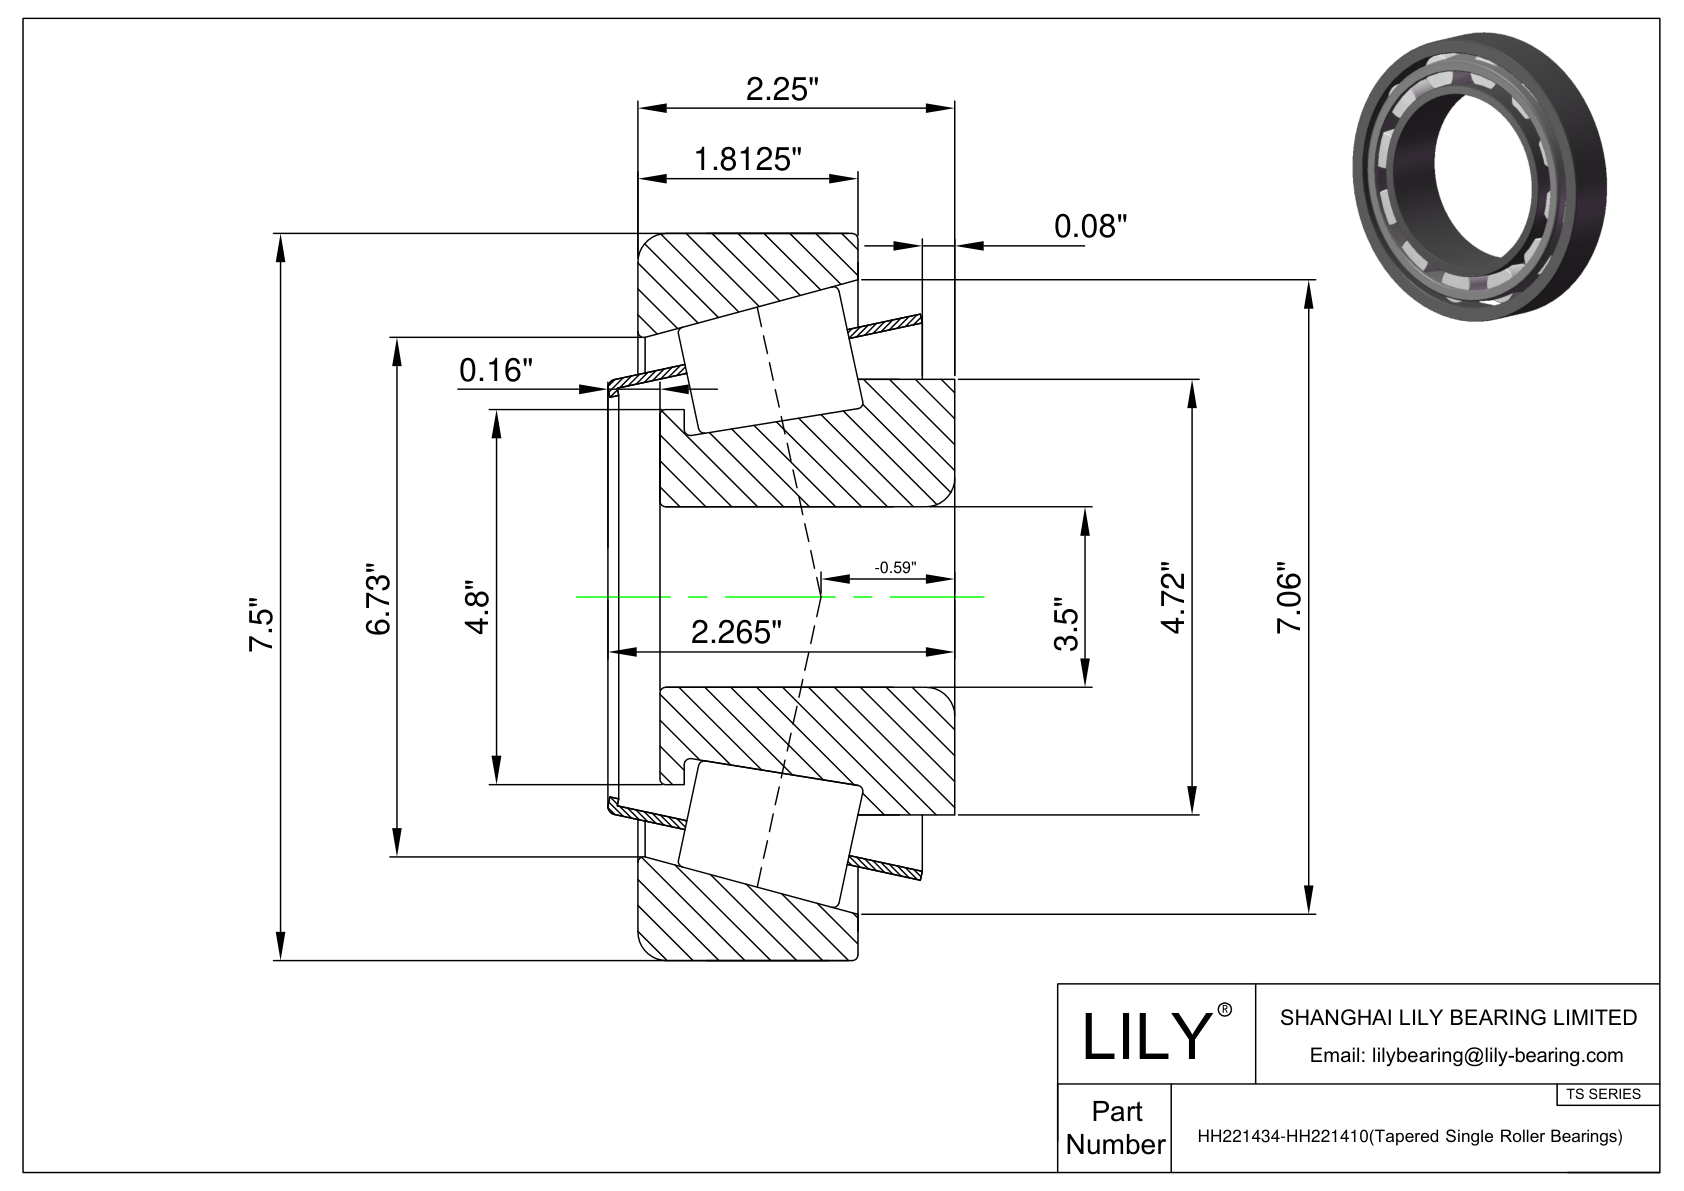 HH221434-HH221410 TS (Tapered Single Roller Bearings) (Imperial) cad drawing